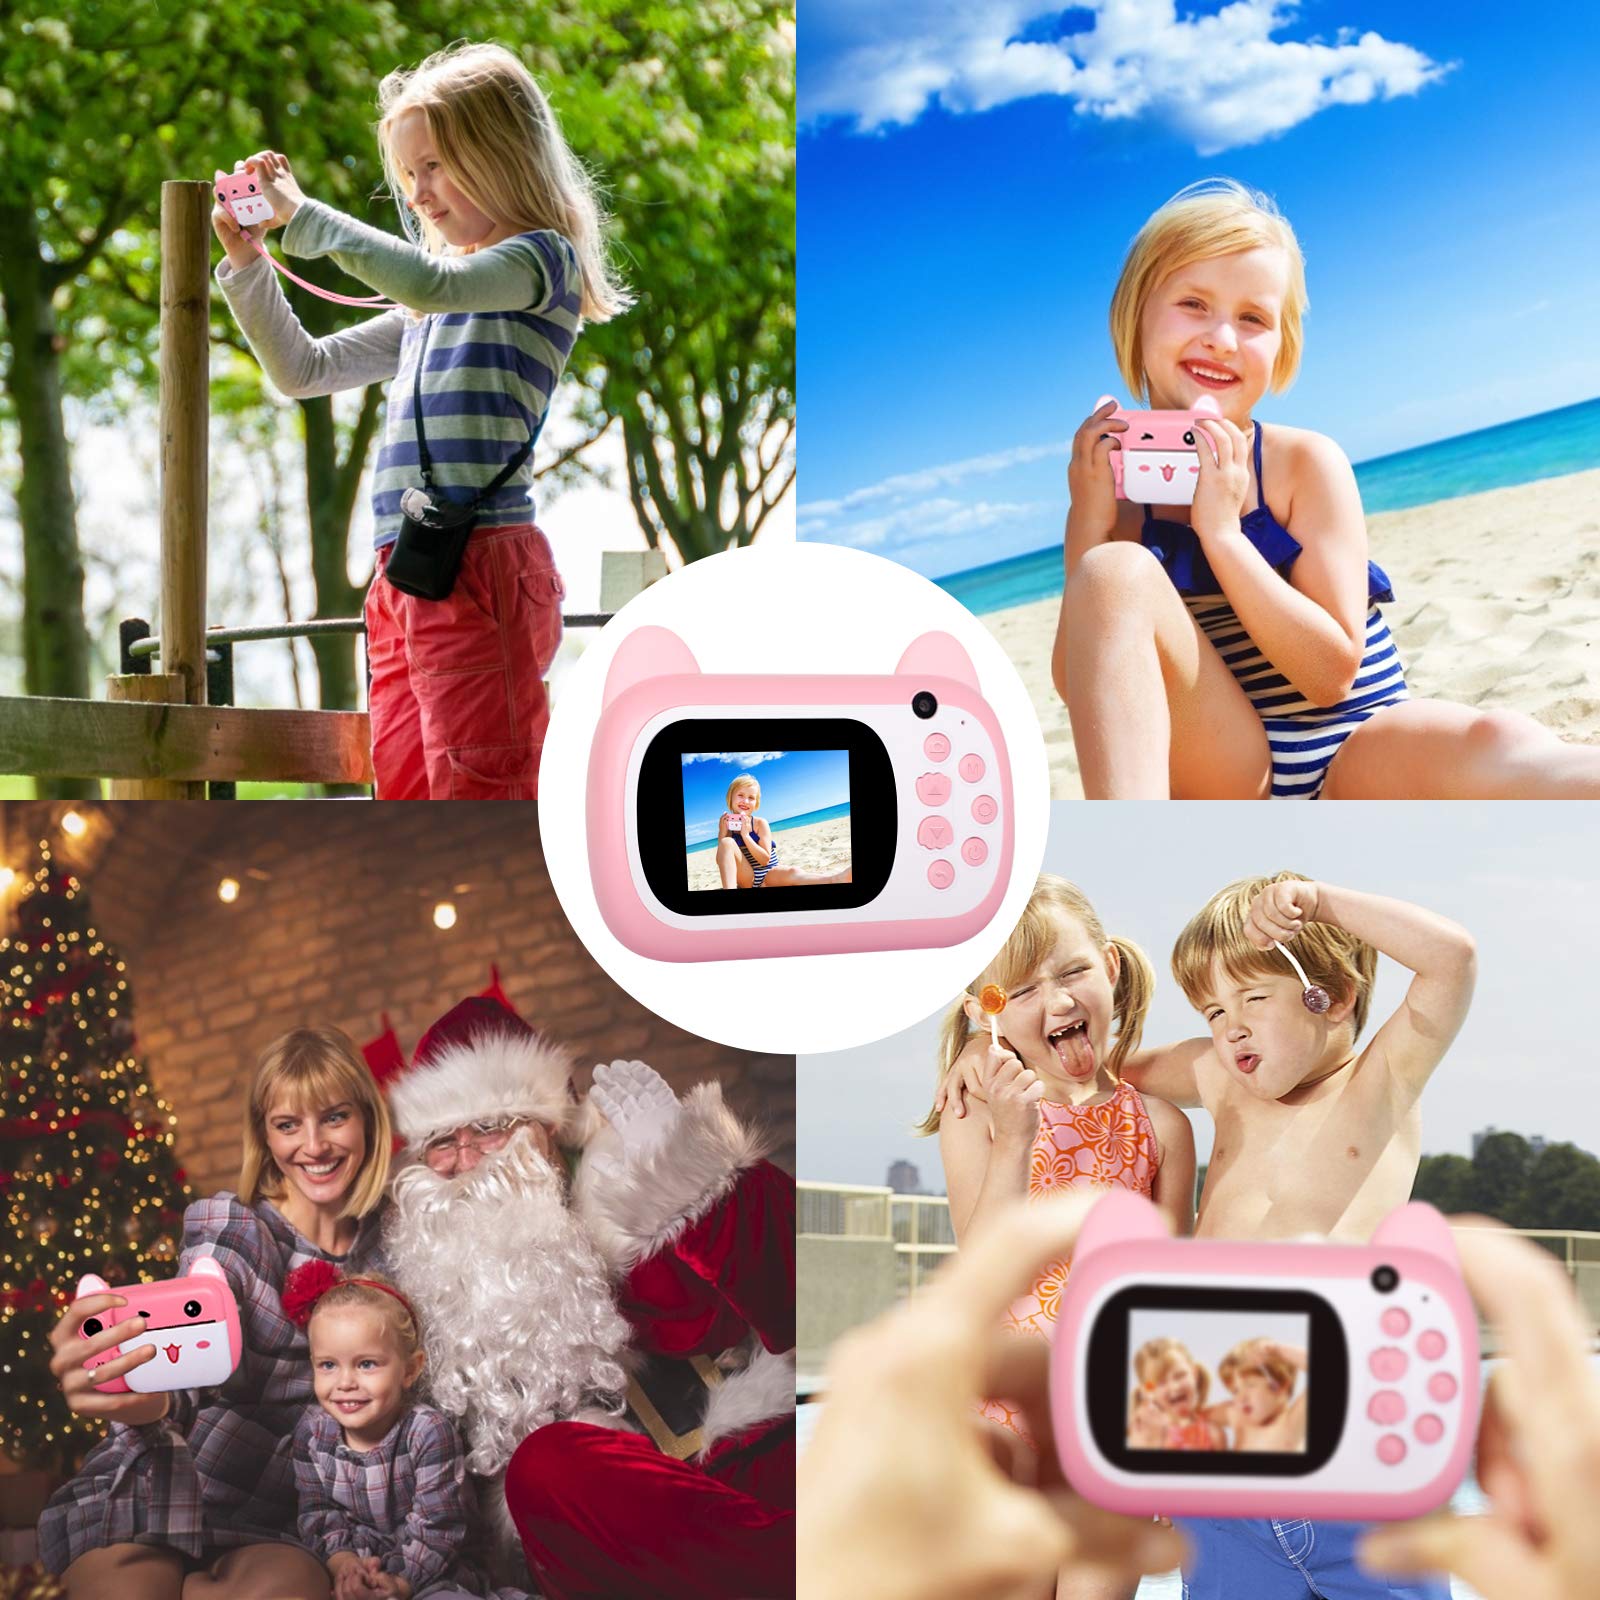 TOYOGO Instant Print Camera for Kids, Upgrade Selfie Kids Camera, Digital No Ink Video Camera with 3 Rolls Print Paper Camera, 1000 mAh,Dual Lens,1080P HD Video Recorder for Girls Boys Gifts Toys Pink